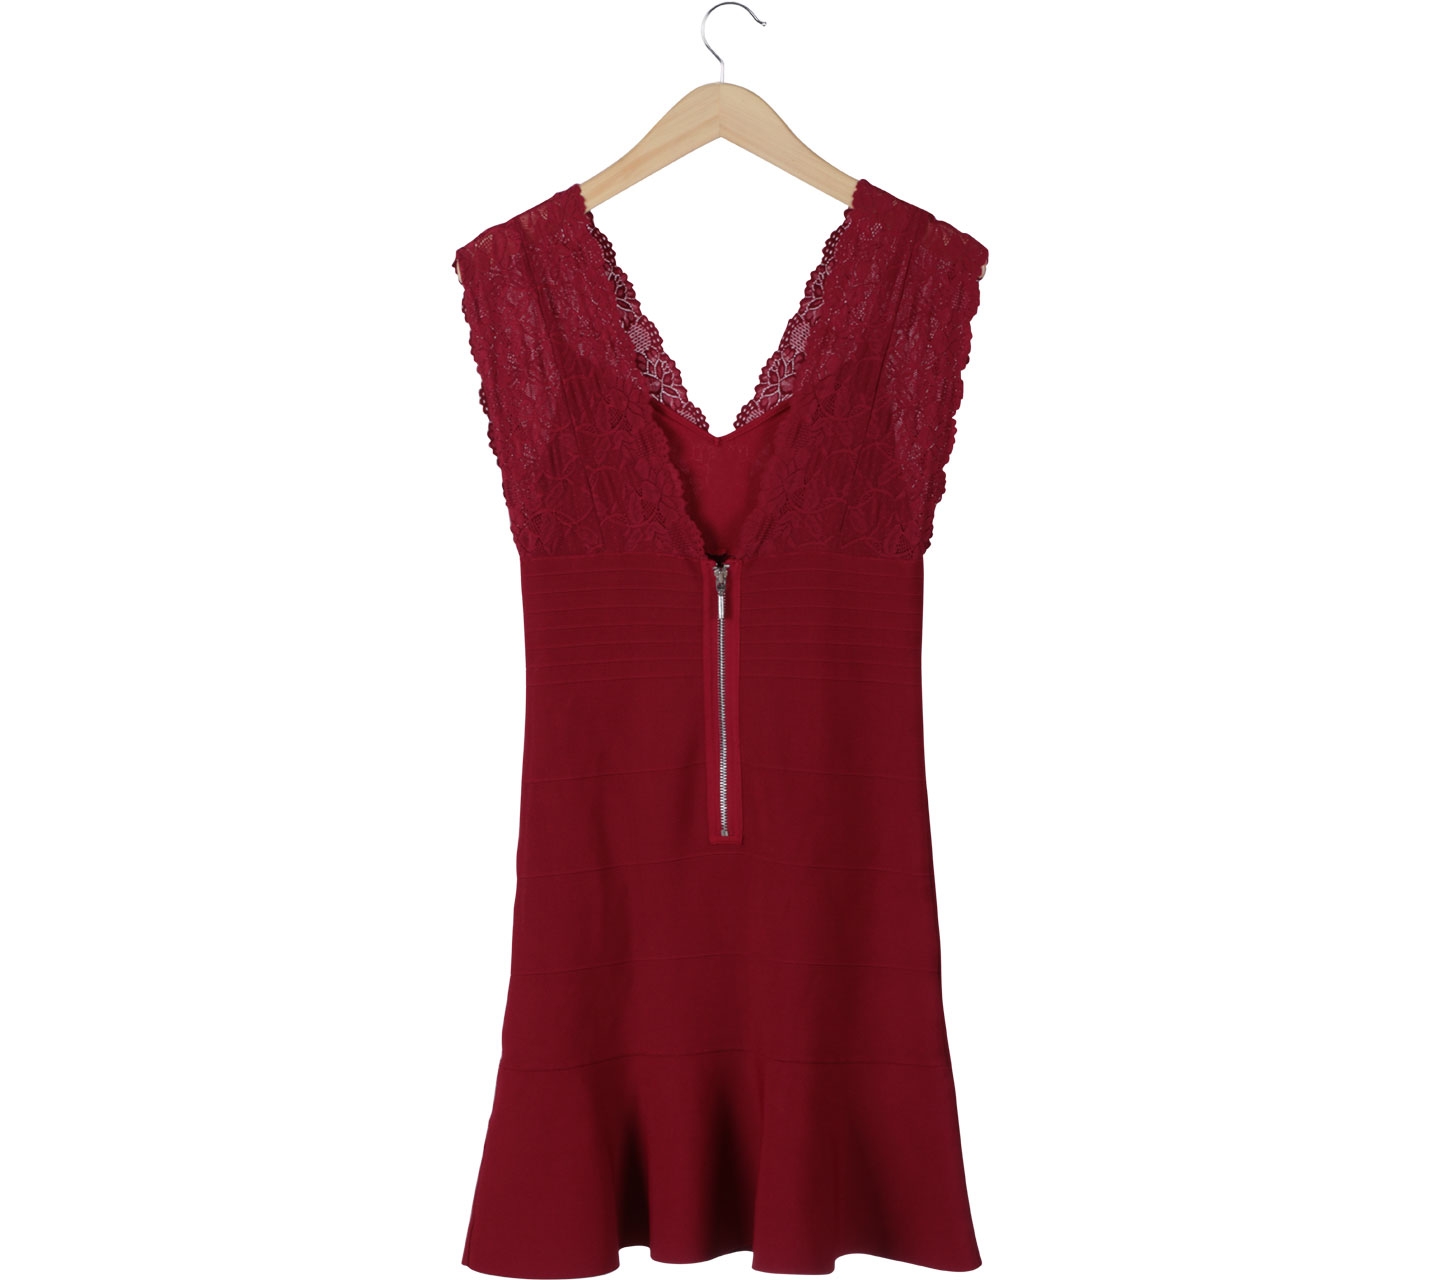 Guess Red Bodycon Lace Mini Dress